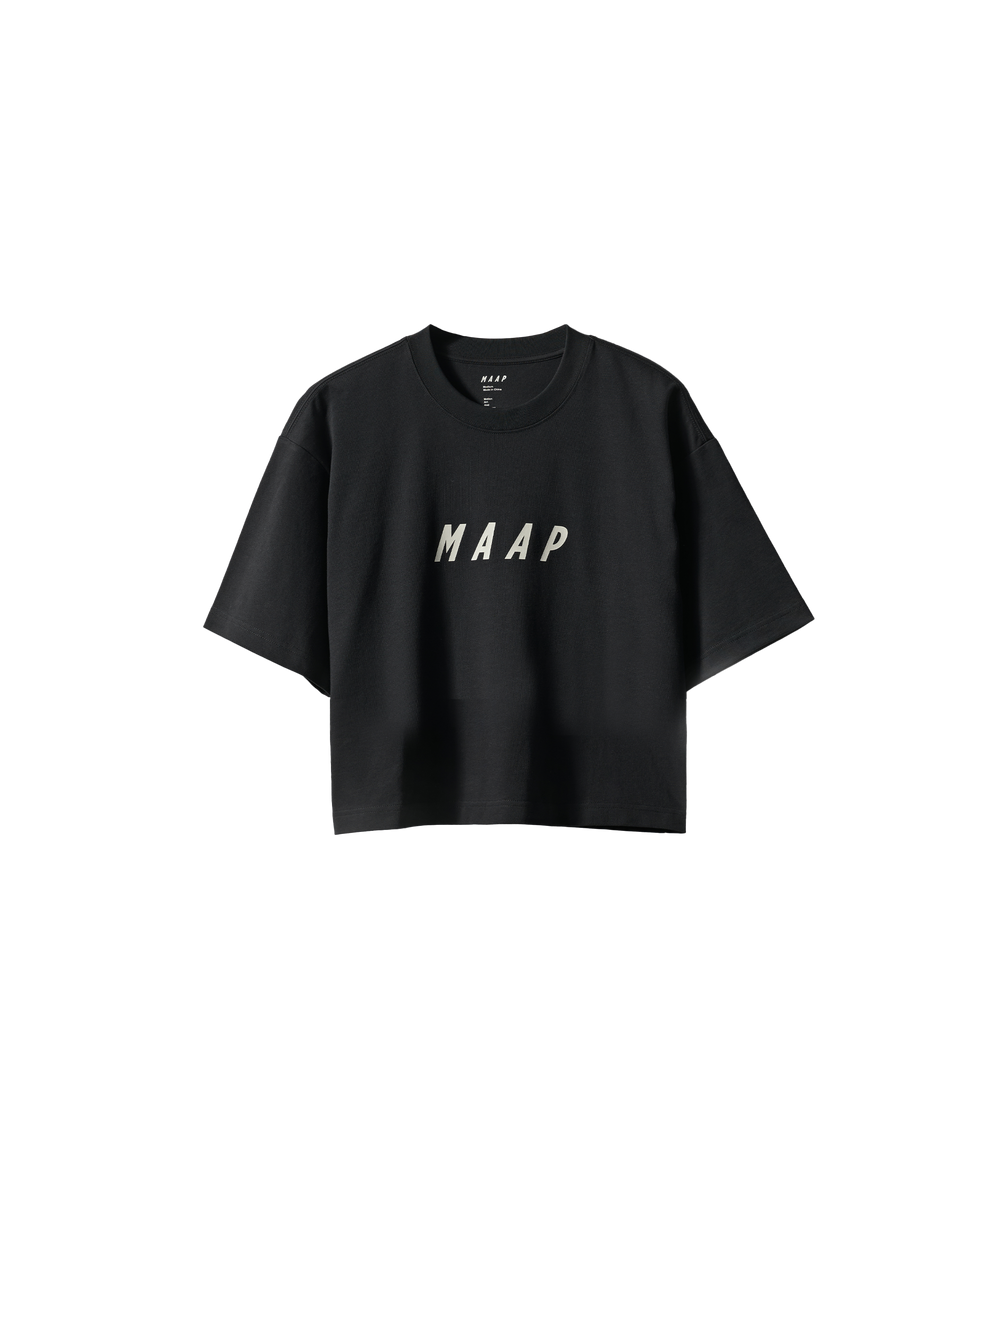 Product Image for Women's LPW Tee